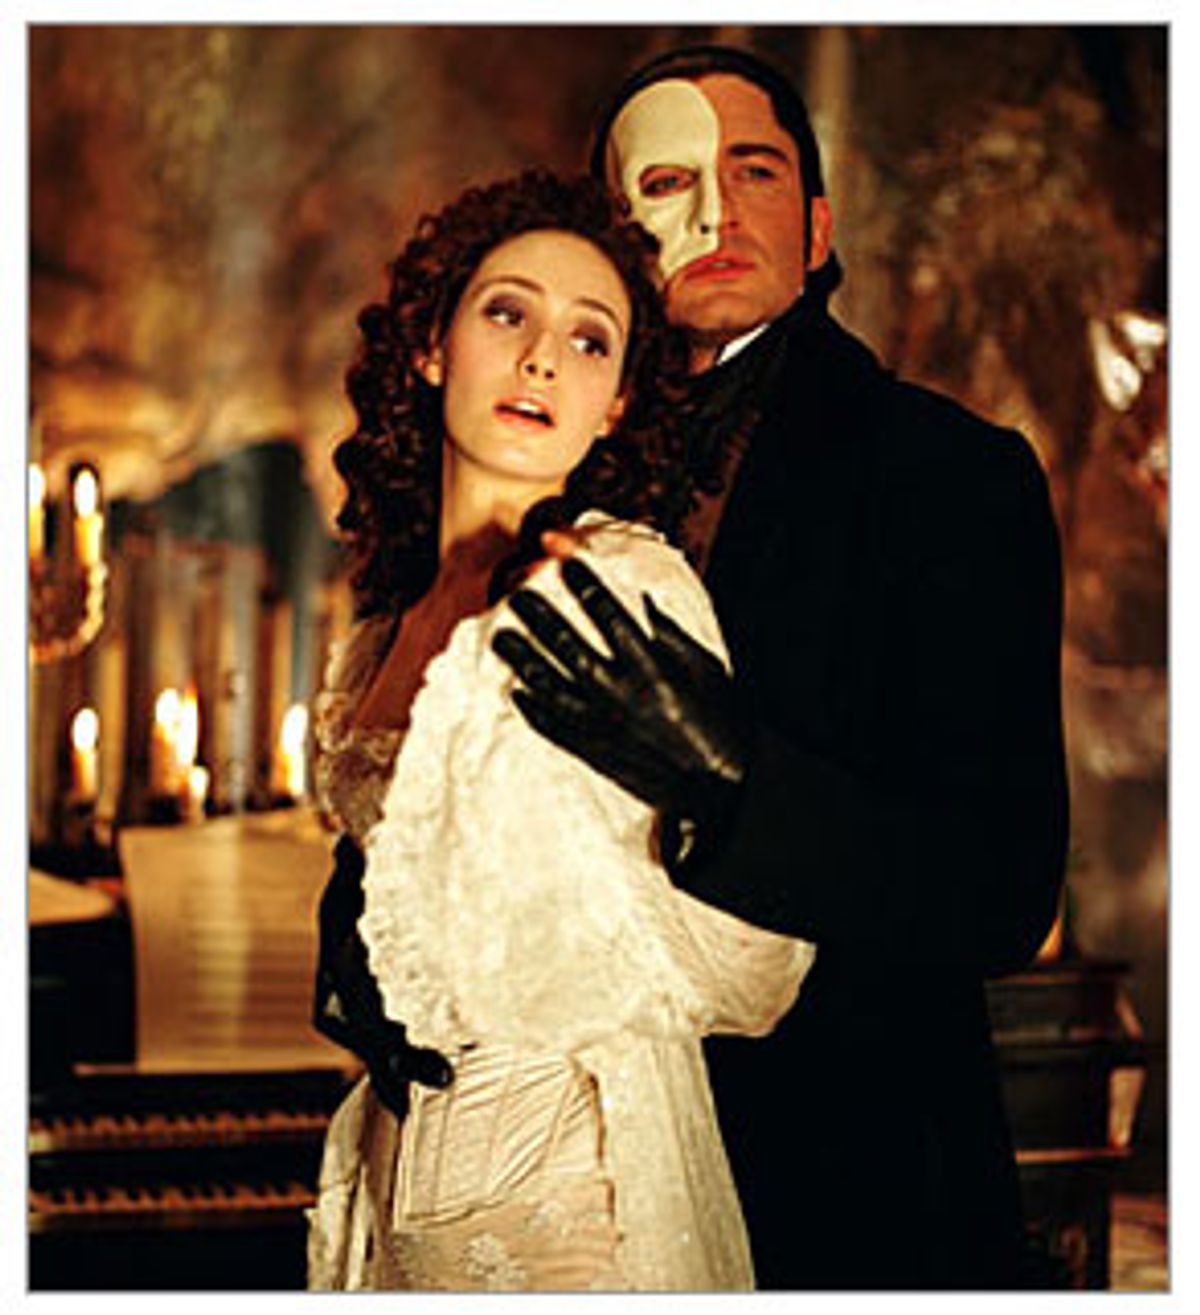 phantom of the opera story about